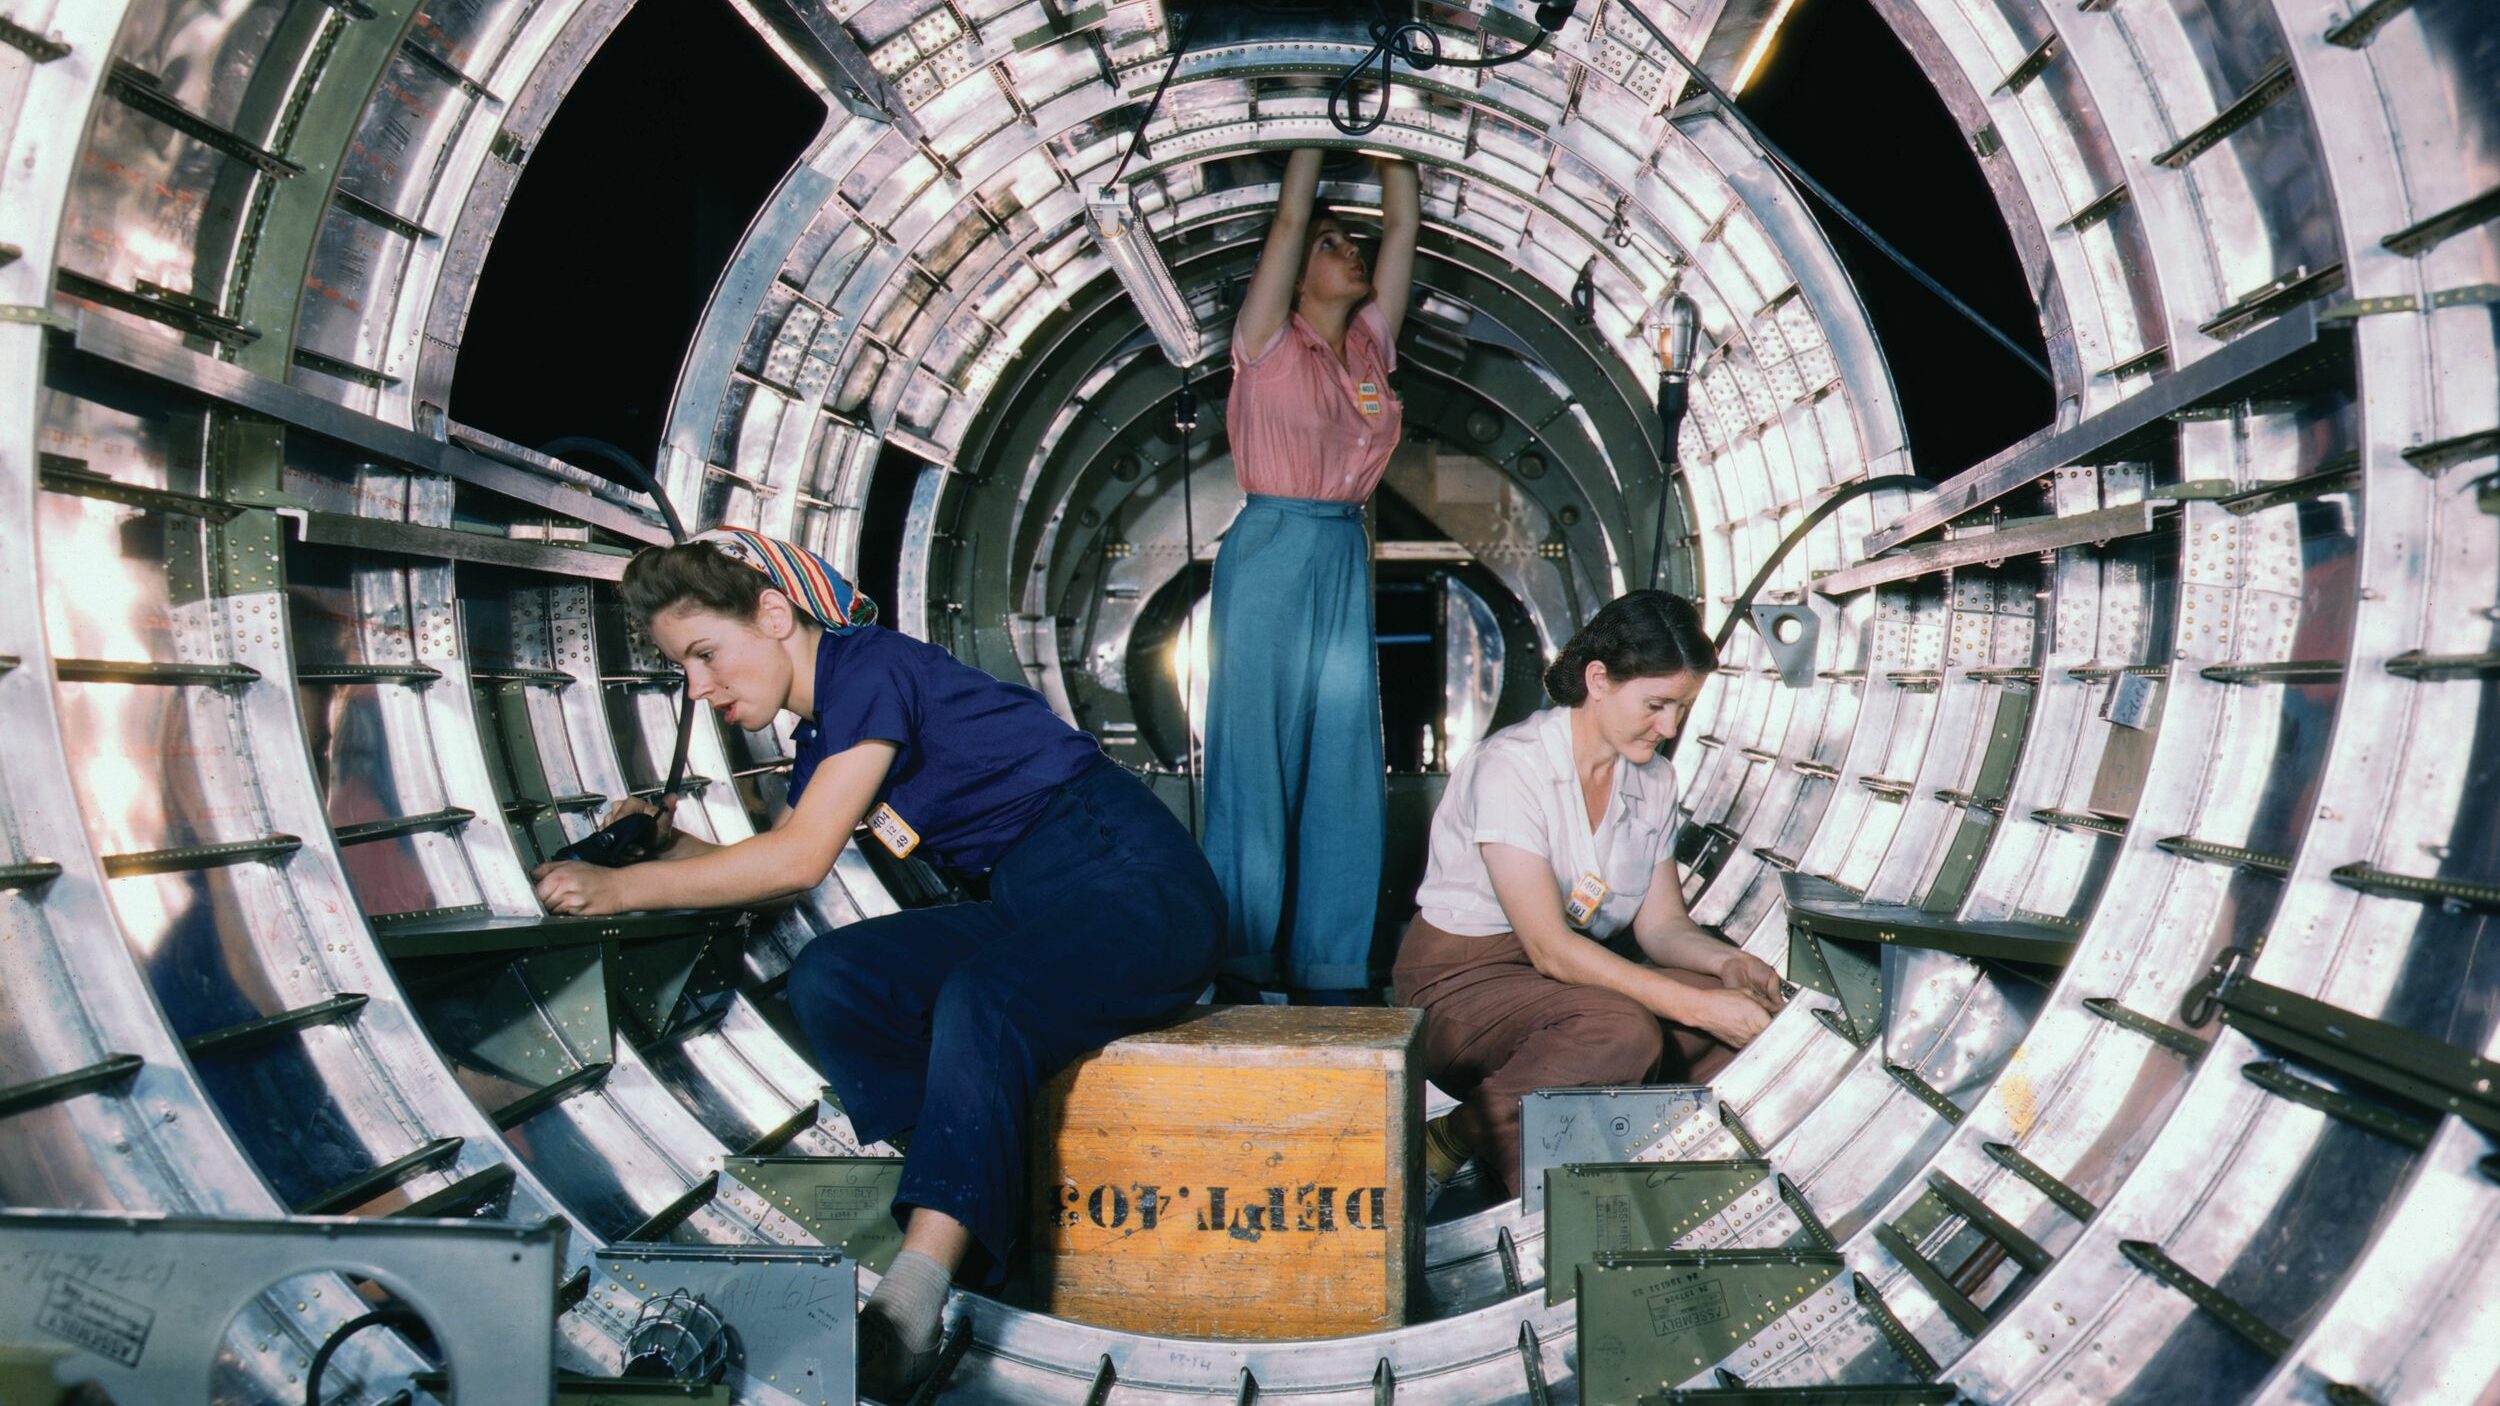 Women install fixtures and assemblies in the fuselage section of a B-17 Flying Fortress bomber at the Douglas Aircraft Company plant in Long Beach, California. This photo is one of a series taken in 1942 by Alfred T. Palmer. With wartime industries severely impacted by the loss of male workers to the armed services, women stepped forward to fill the gaps—and forever changed American society.